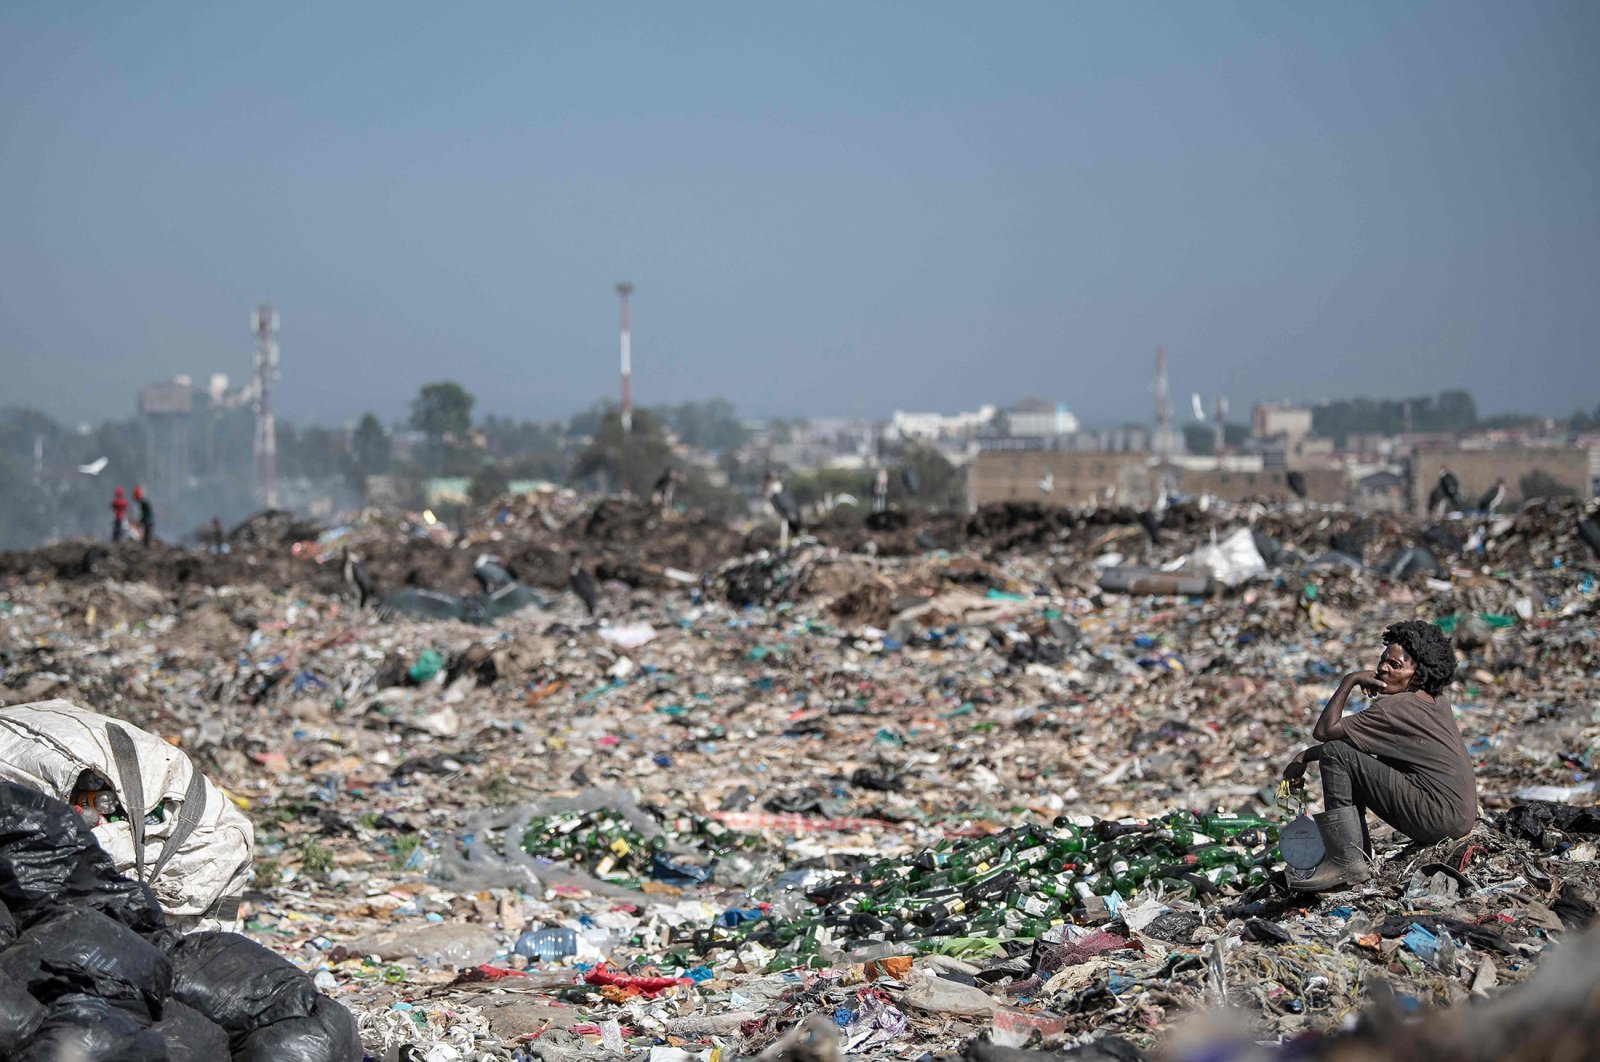 A waste picker sits by a pile of empty bottles at the Dandora garbage dump where people make a living scavenging for reusables and recyclables that can be resold in Nairobi, Kenya, Feb. 26, 2022. (AFP Photo)